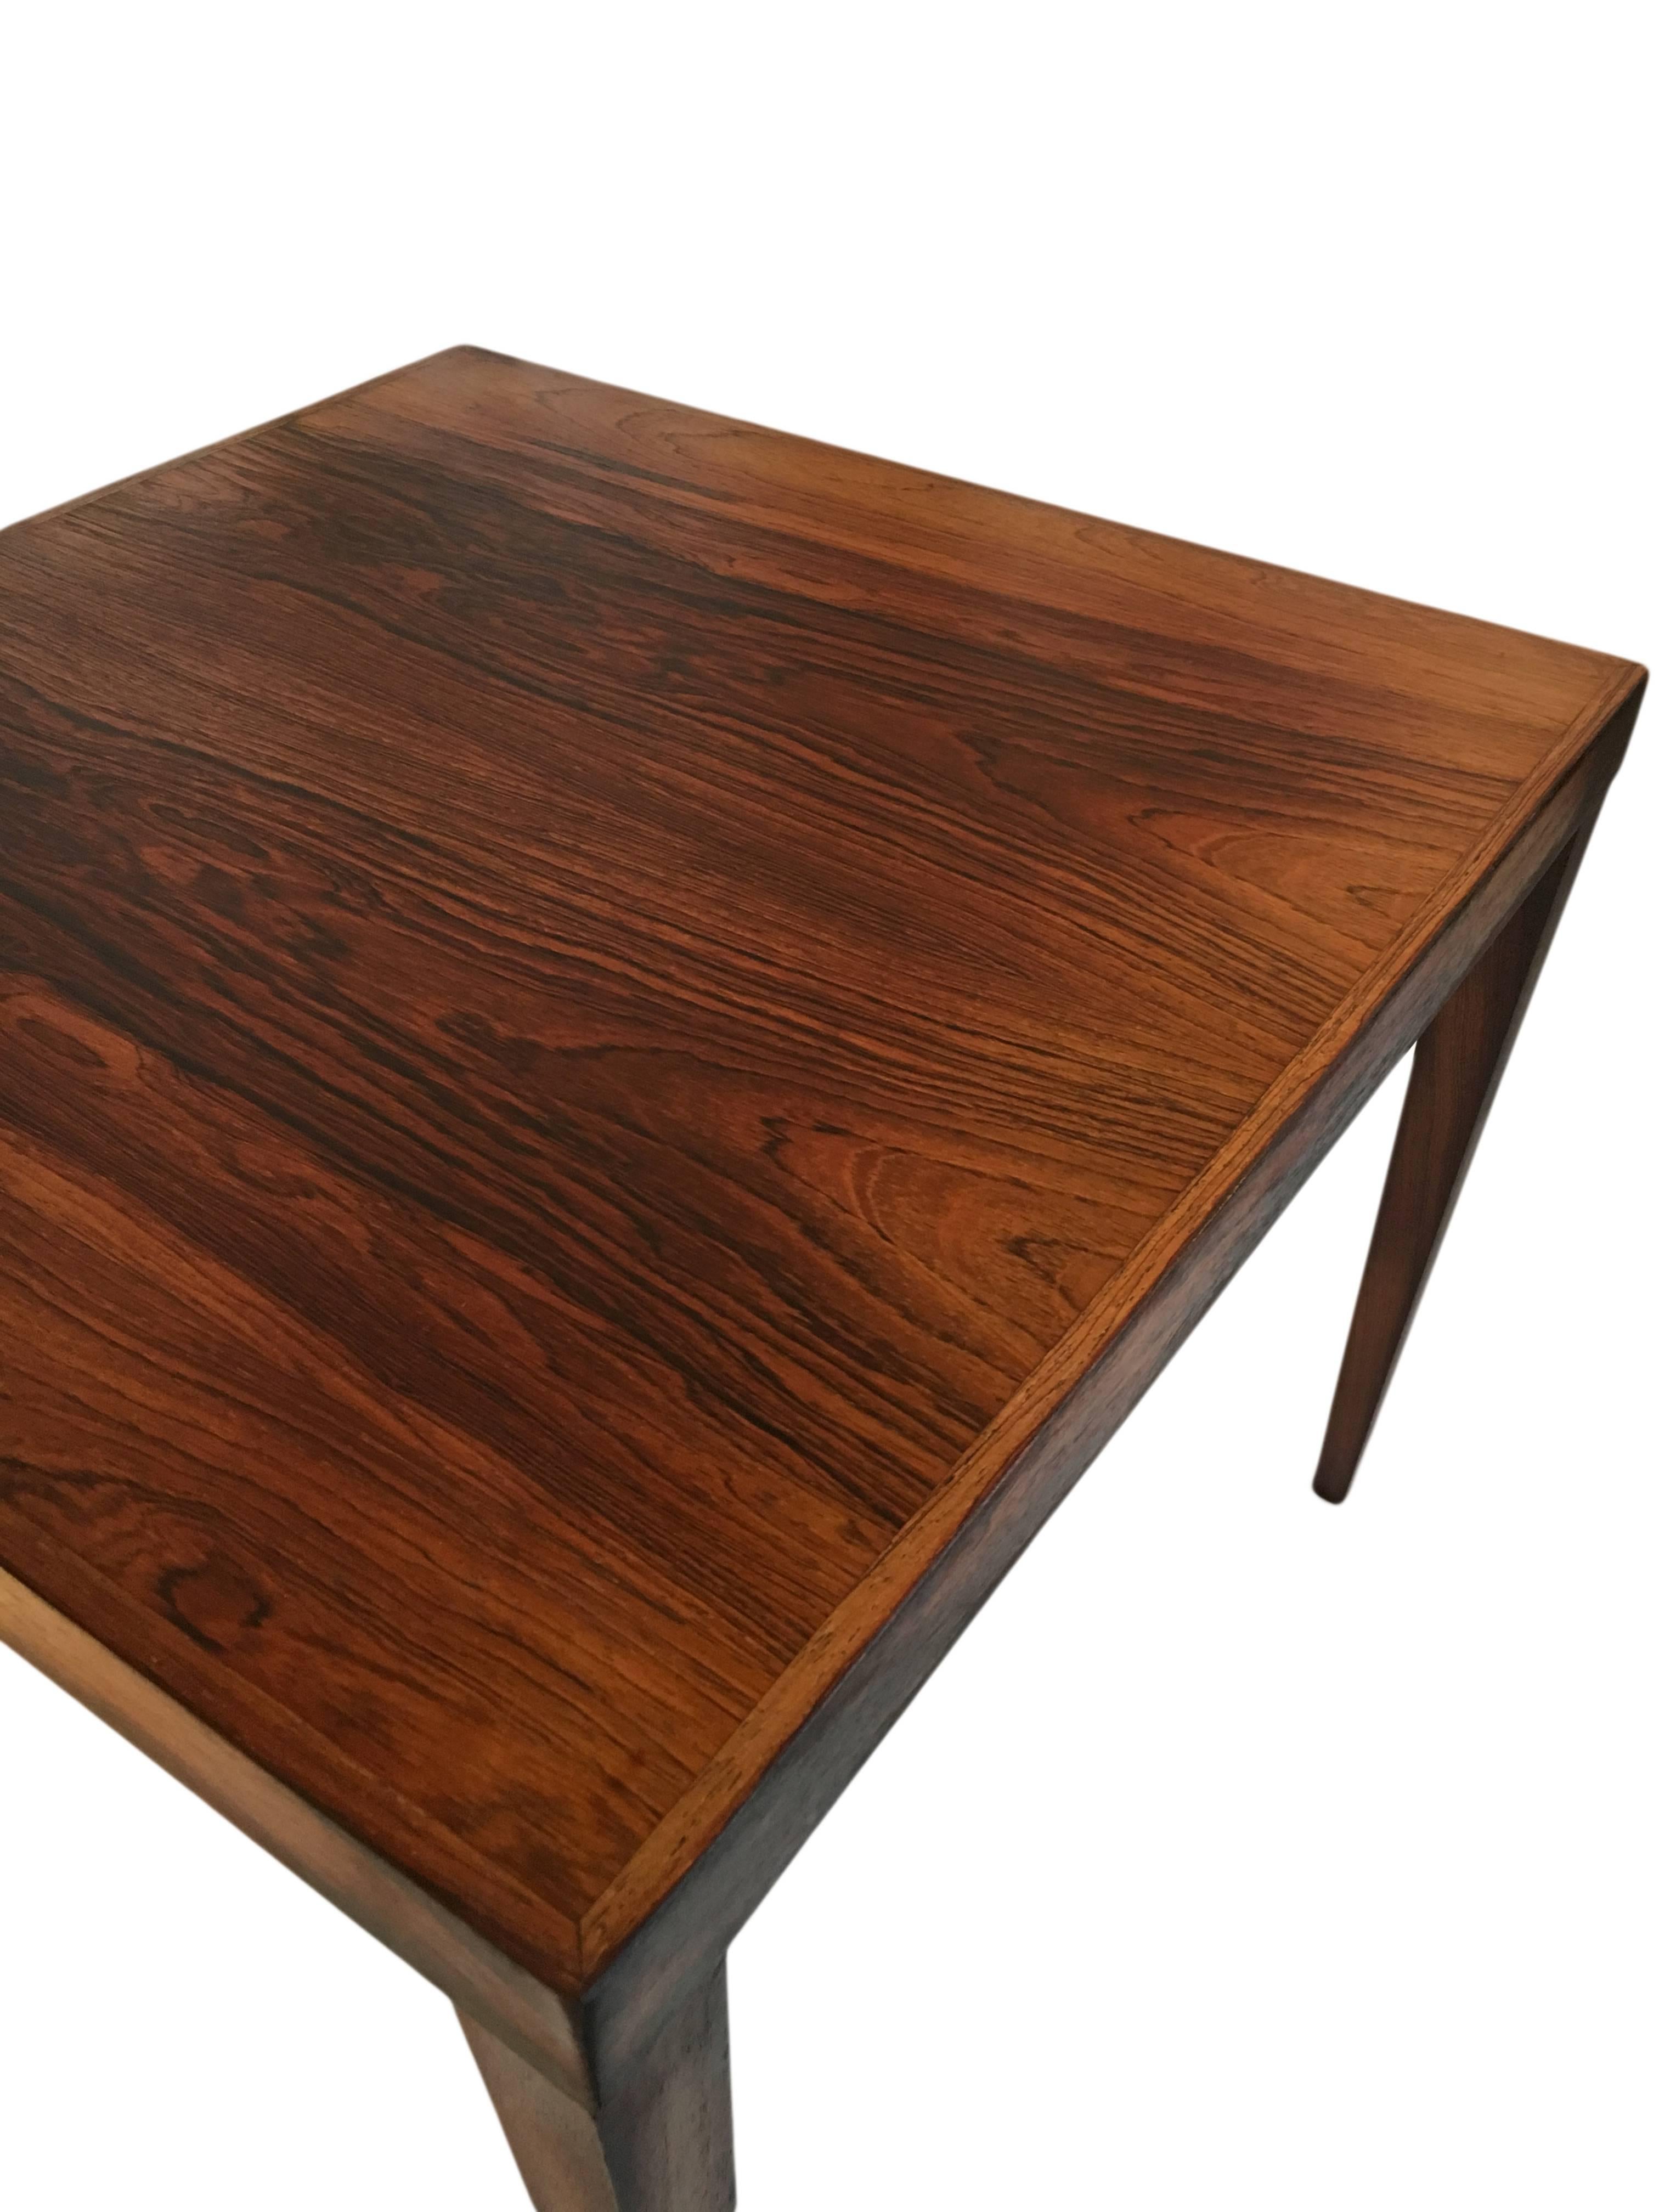 Danish Midcentury coffee table, circa 1960. Simply designed but with wonderful rosewood grain and tapered legs.